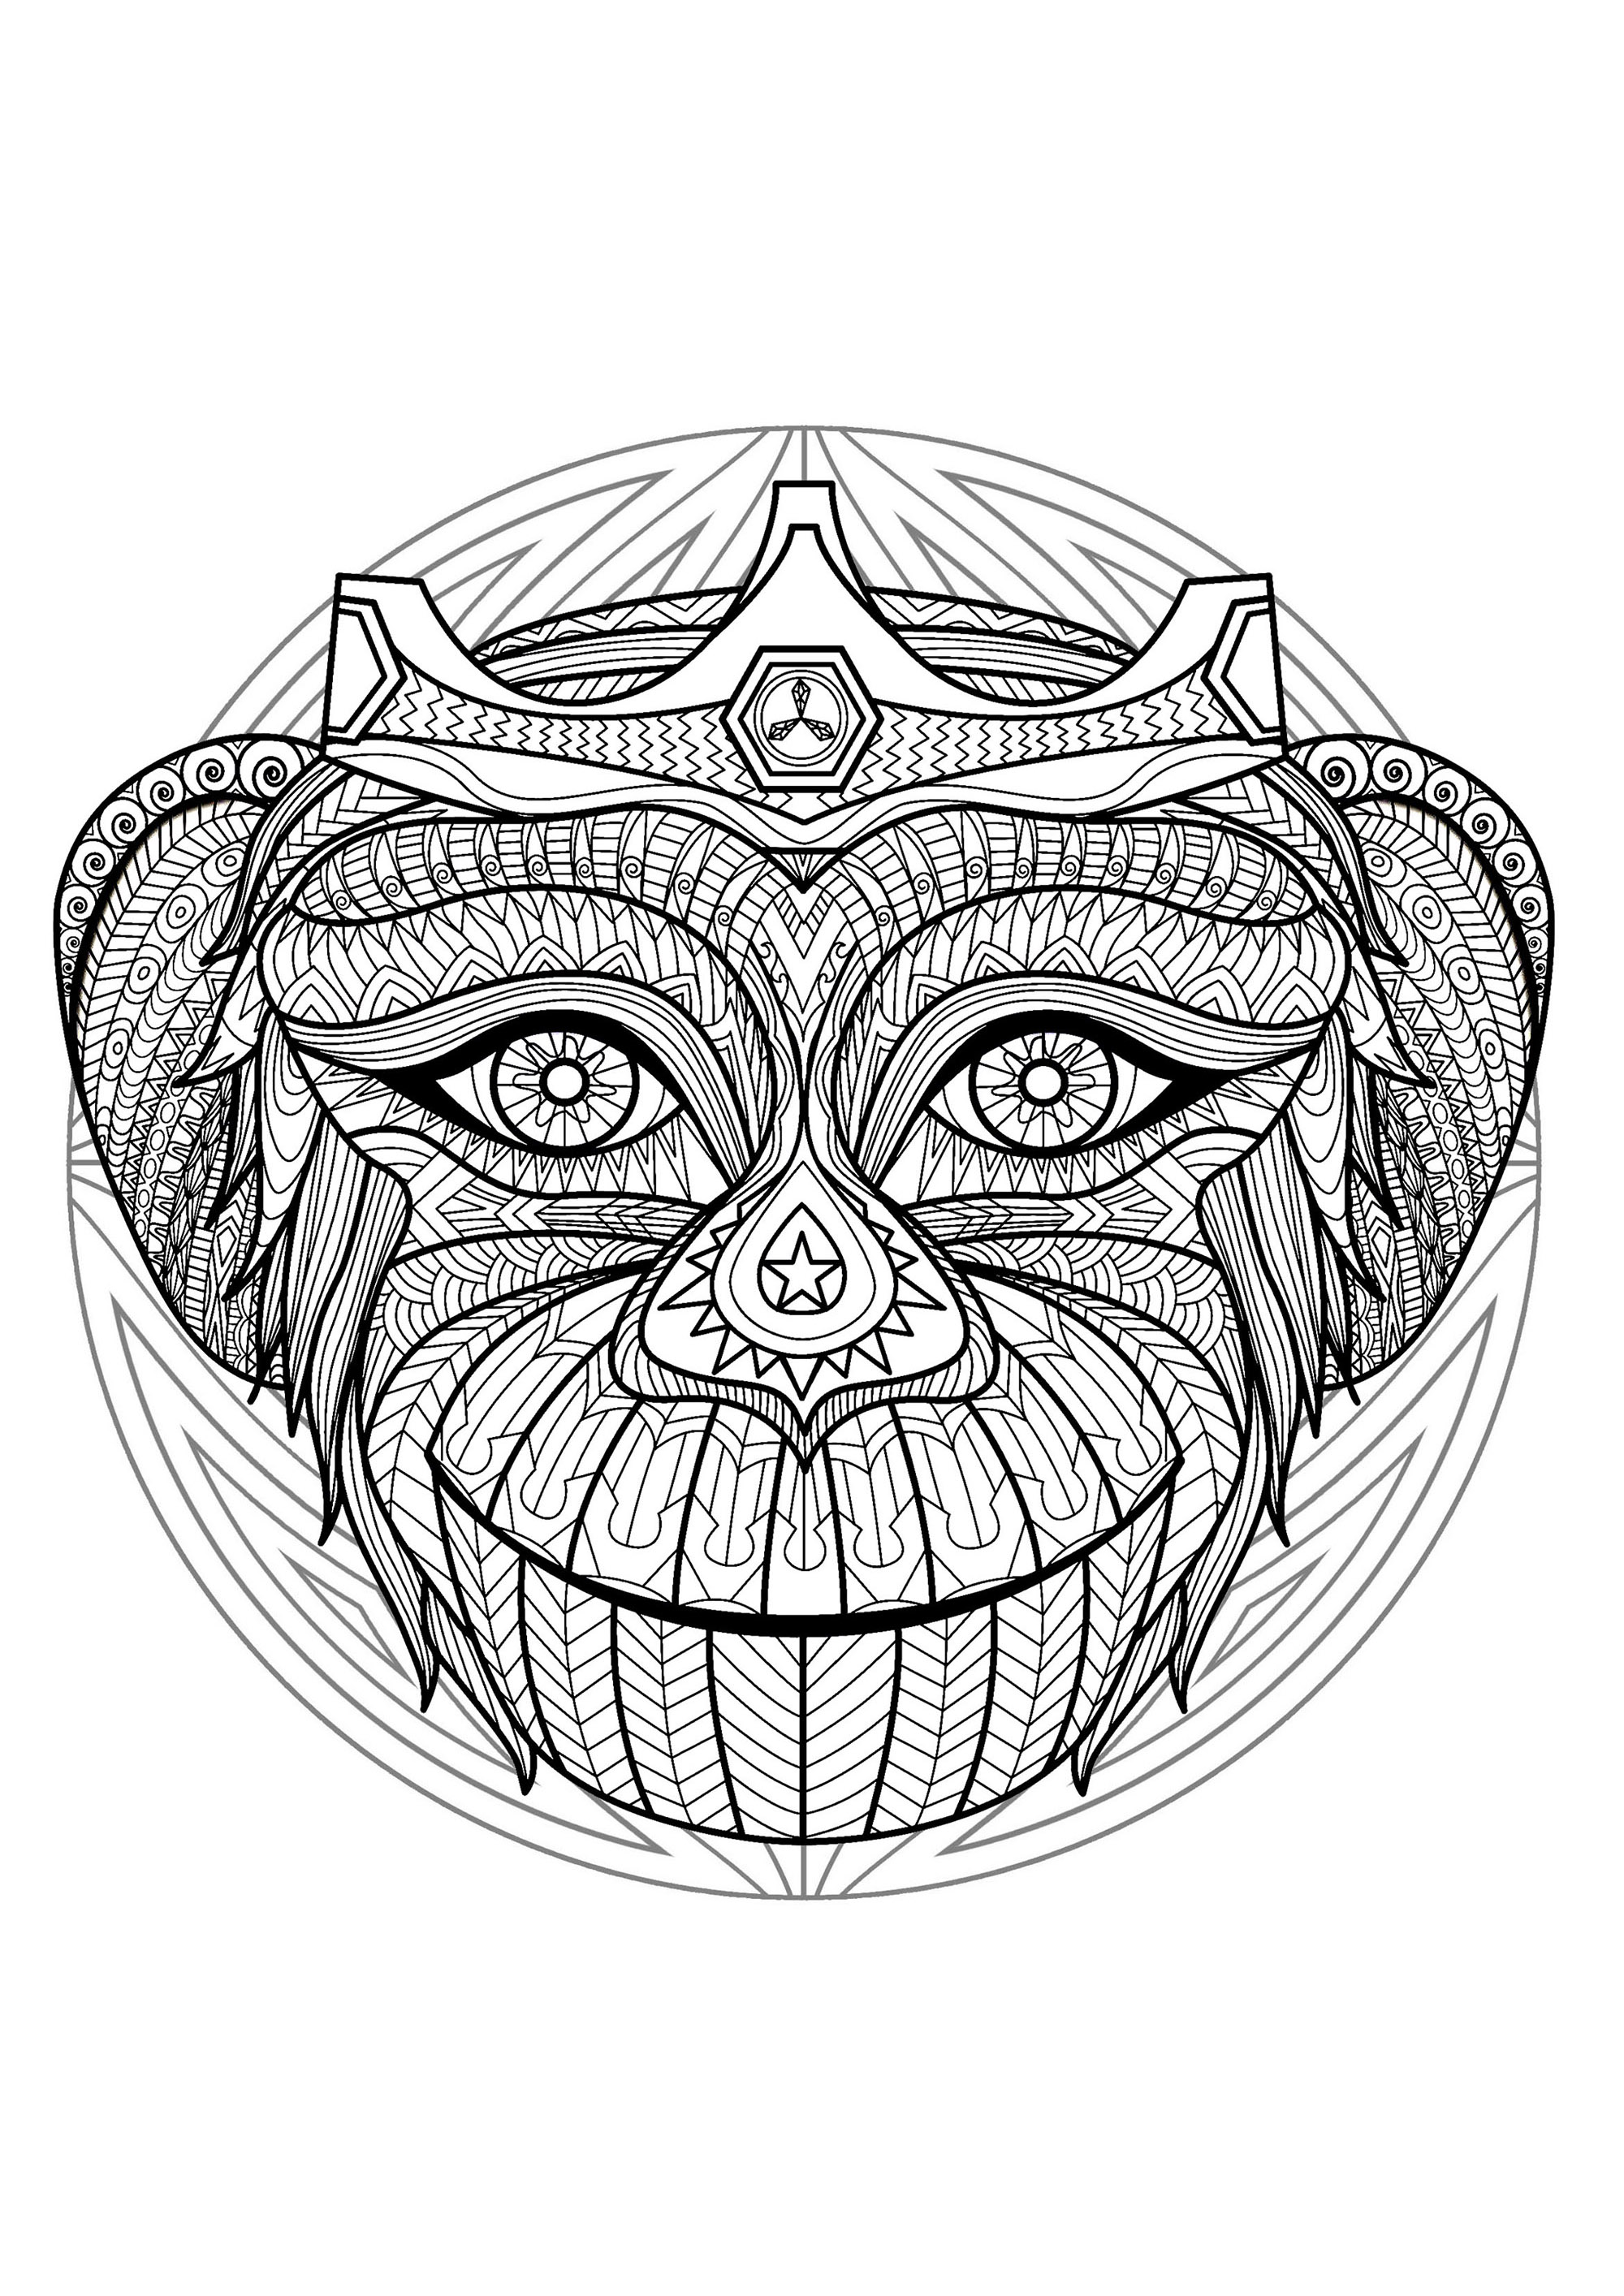 Free Mandalas coloring page to print and color